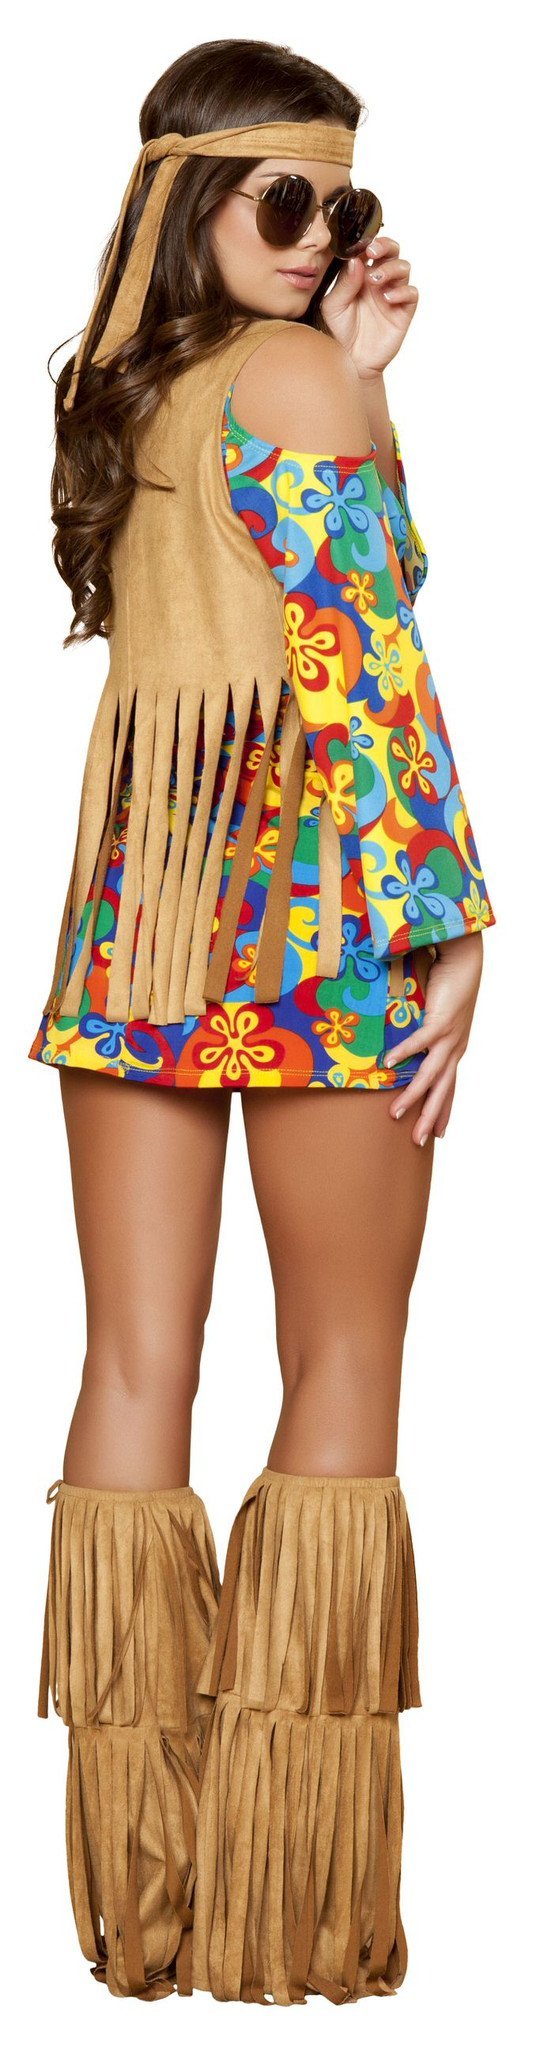 Buy 3pc Hippie Hottie Costume from RomaRetailShop for 64.99 with Same Day Shipping Designed by Roma Costume 4436-AS-S/M